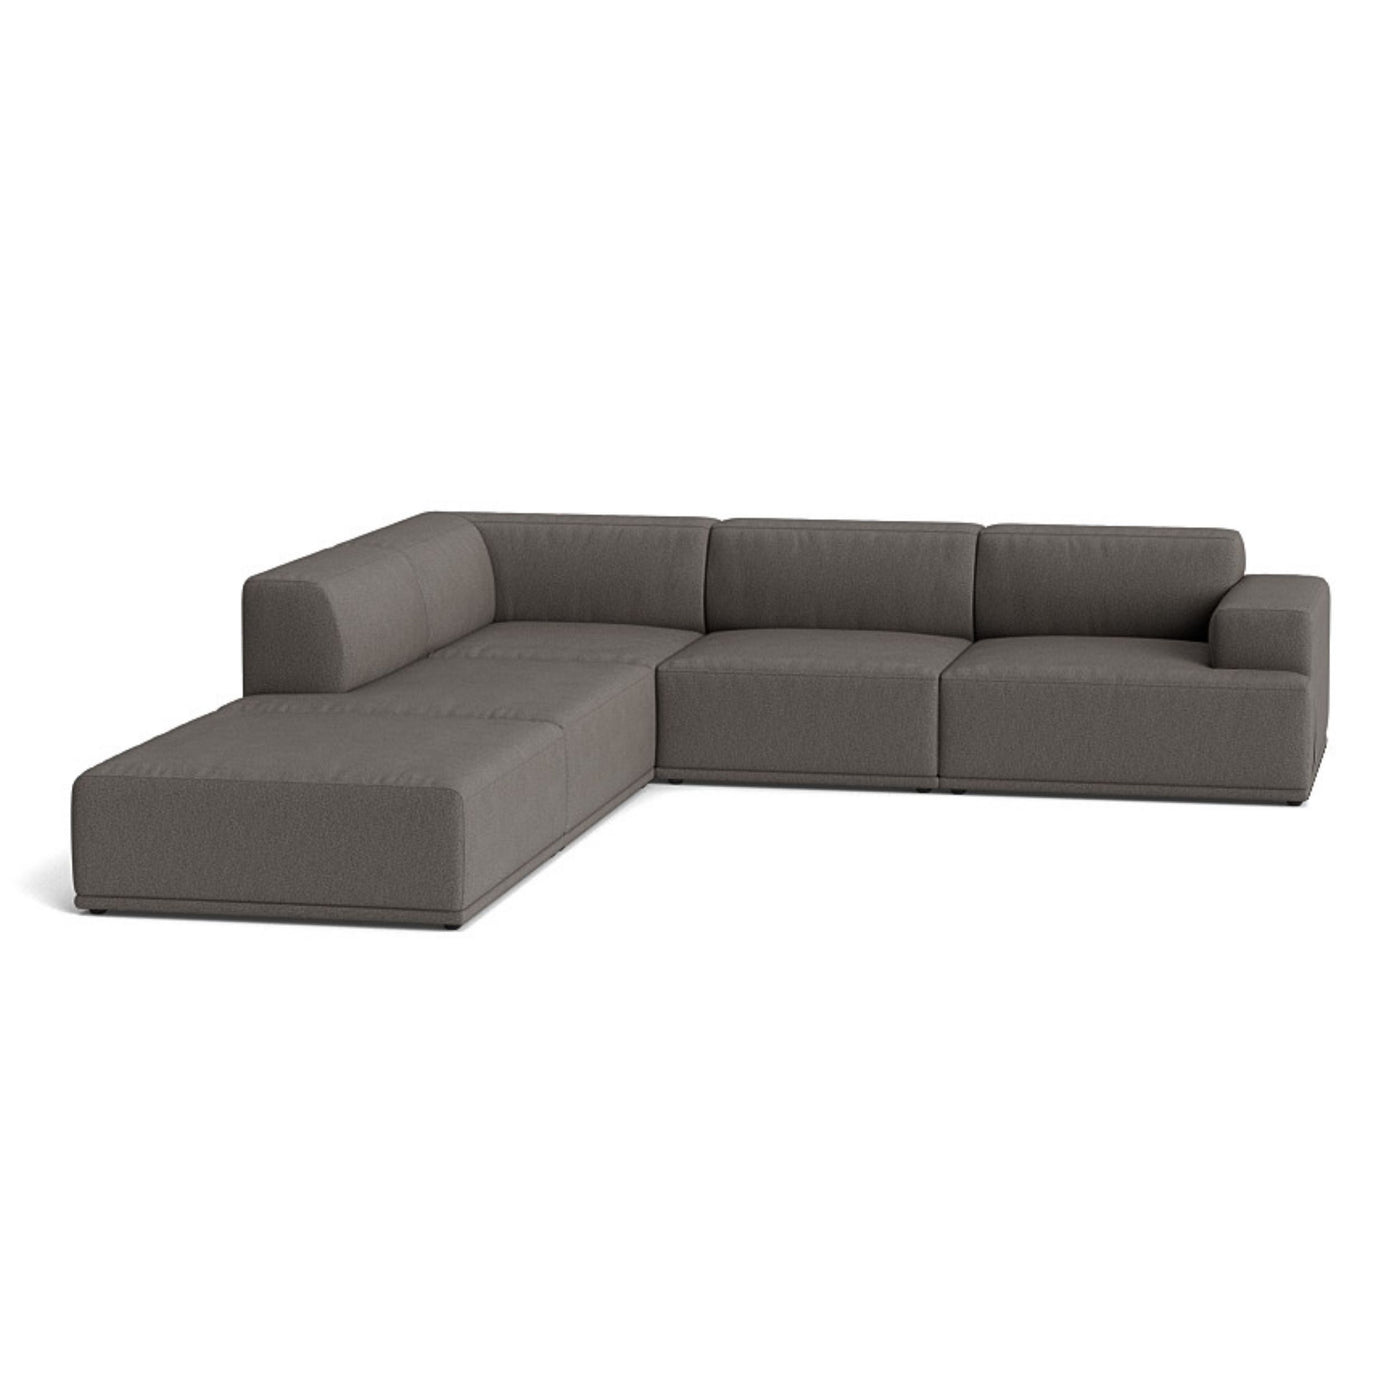 Muuto Connect Soft Modular Corner Sofa, configuration 1. Made-to-order from someday designs. #colour_clay-9